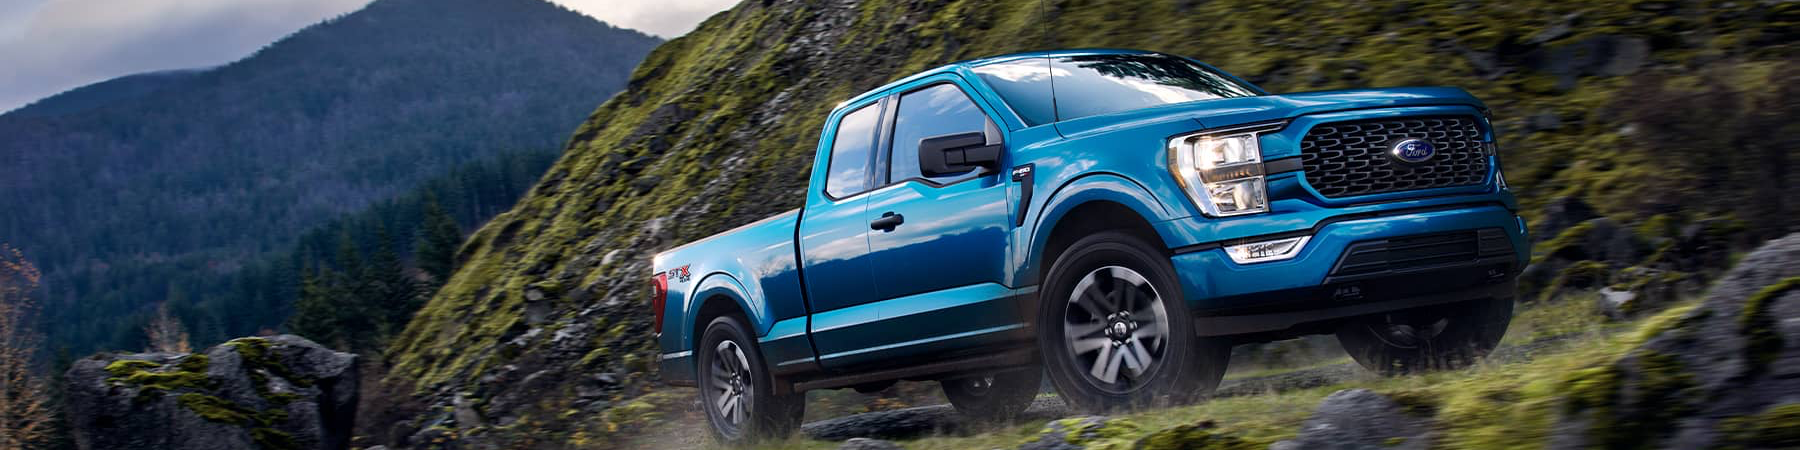 Blue 2021 Ford F-150 climbing a mountain road